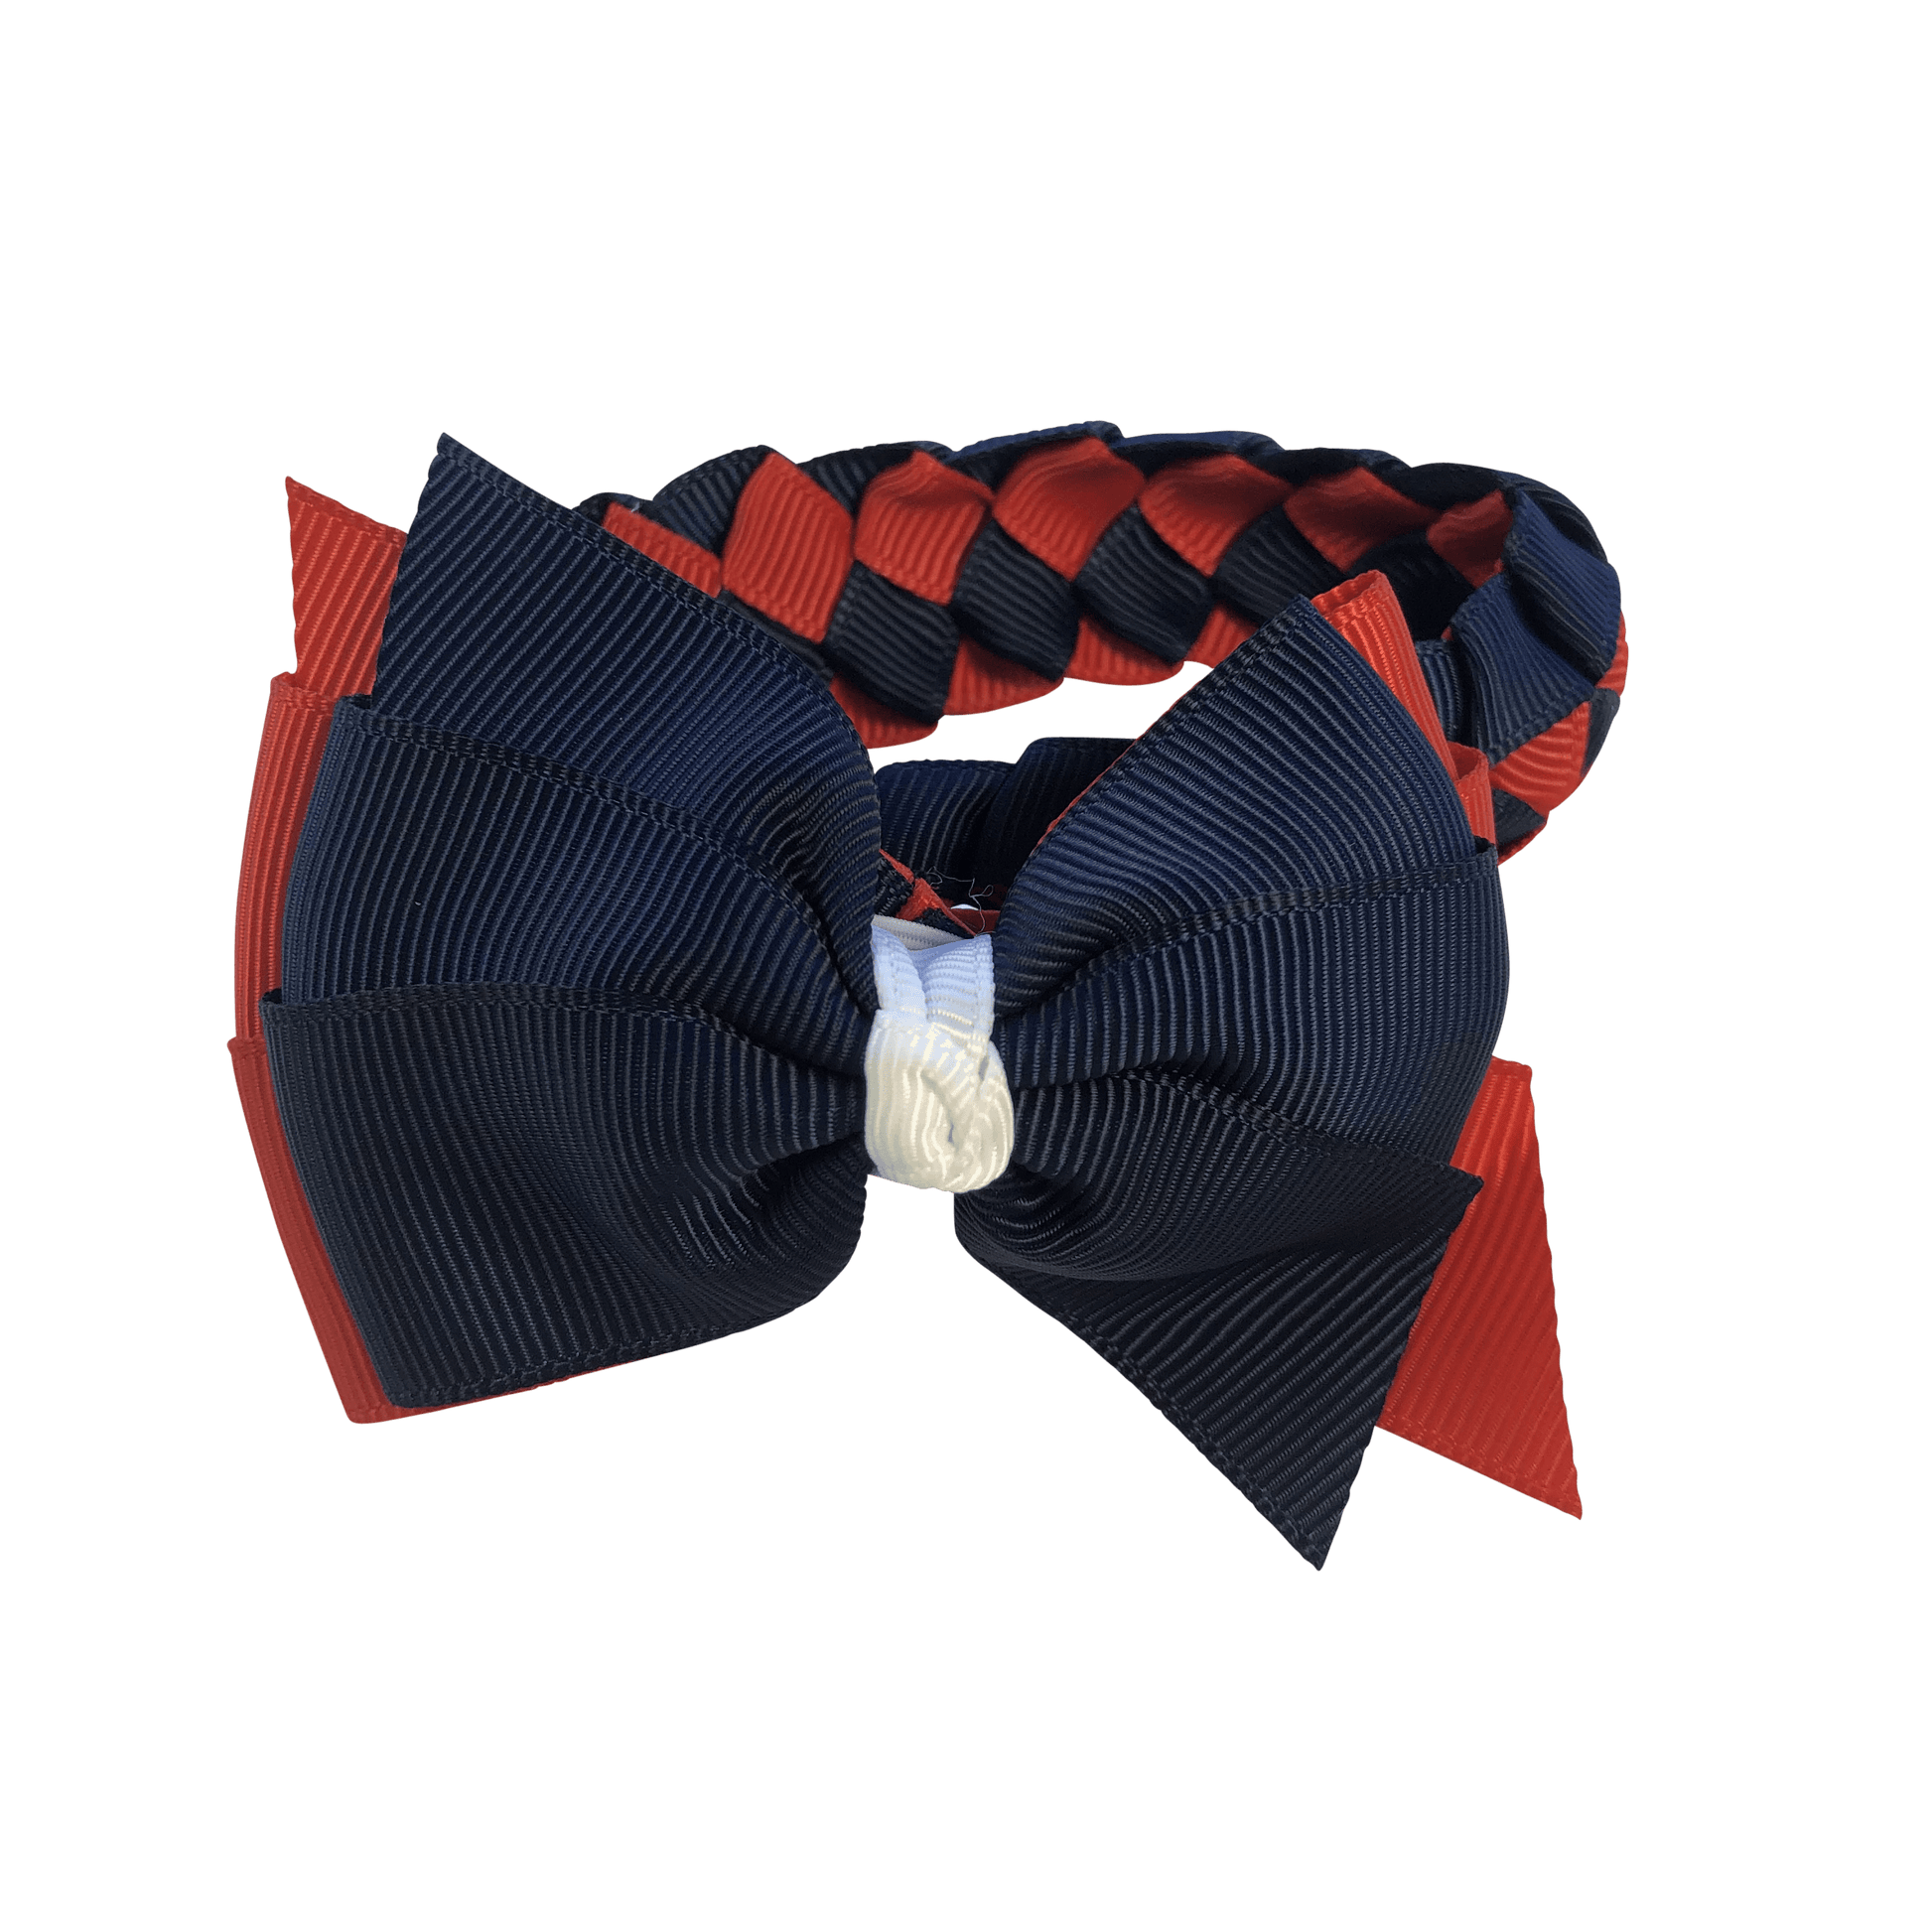 Red & Navy & White Hair Accessories - Assorted Hair Accessories - School Uniform Hair Accessories - Ponytails and Fairytales